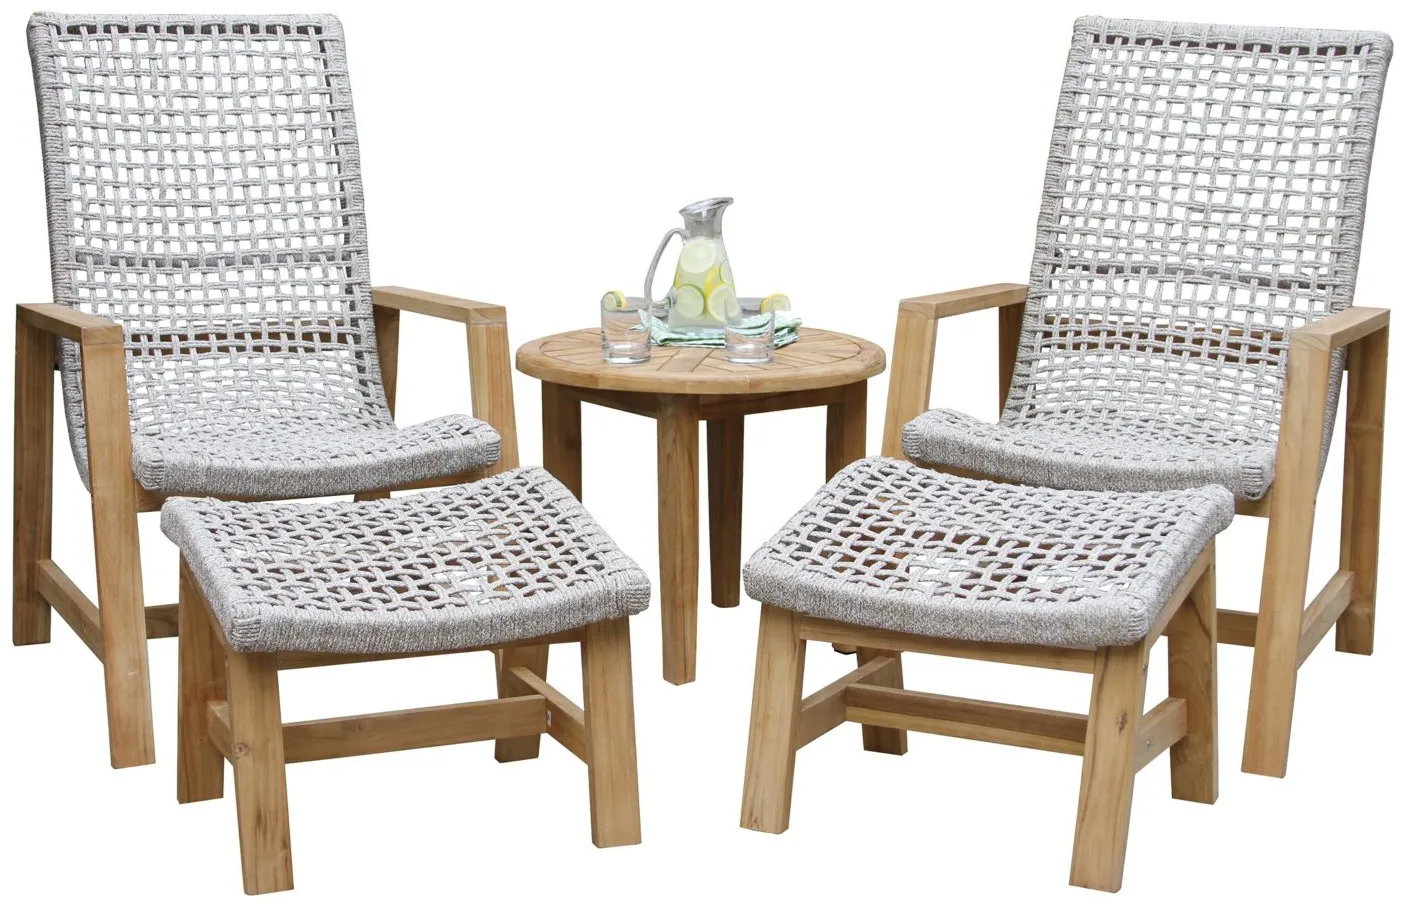 Nautical 5-pc. Teak Outdoor Lounge Set w/ Ottomans in Charcoal by Outdoor Interiors